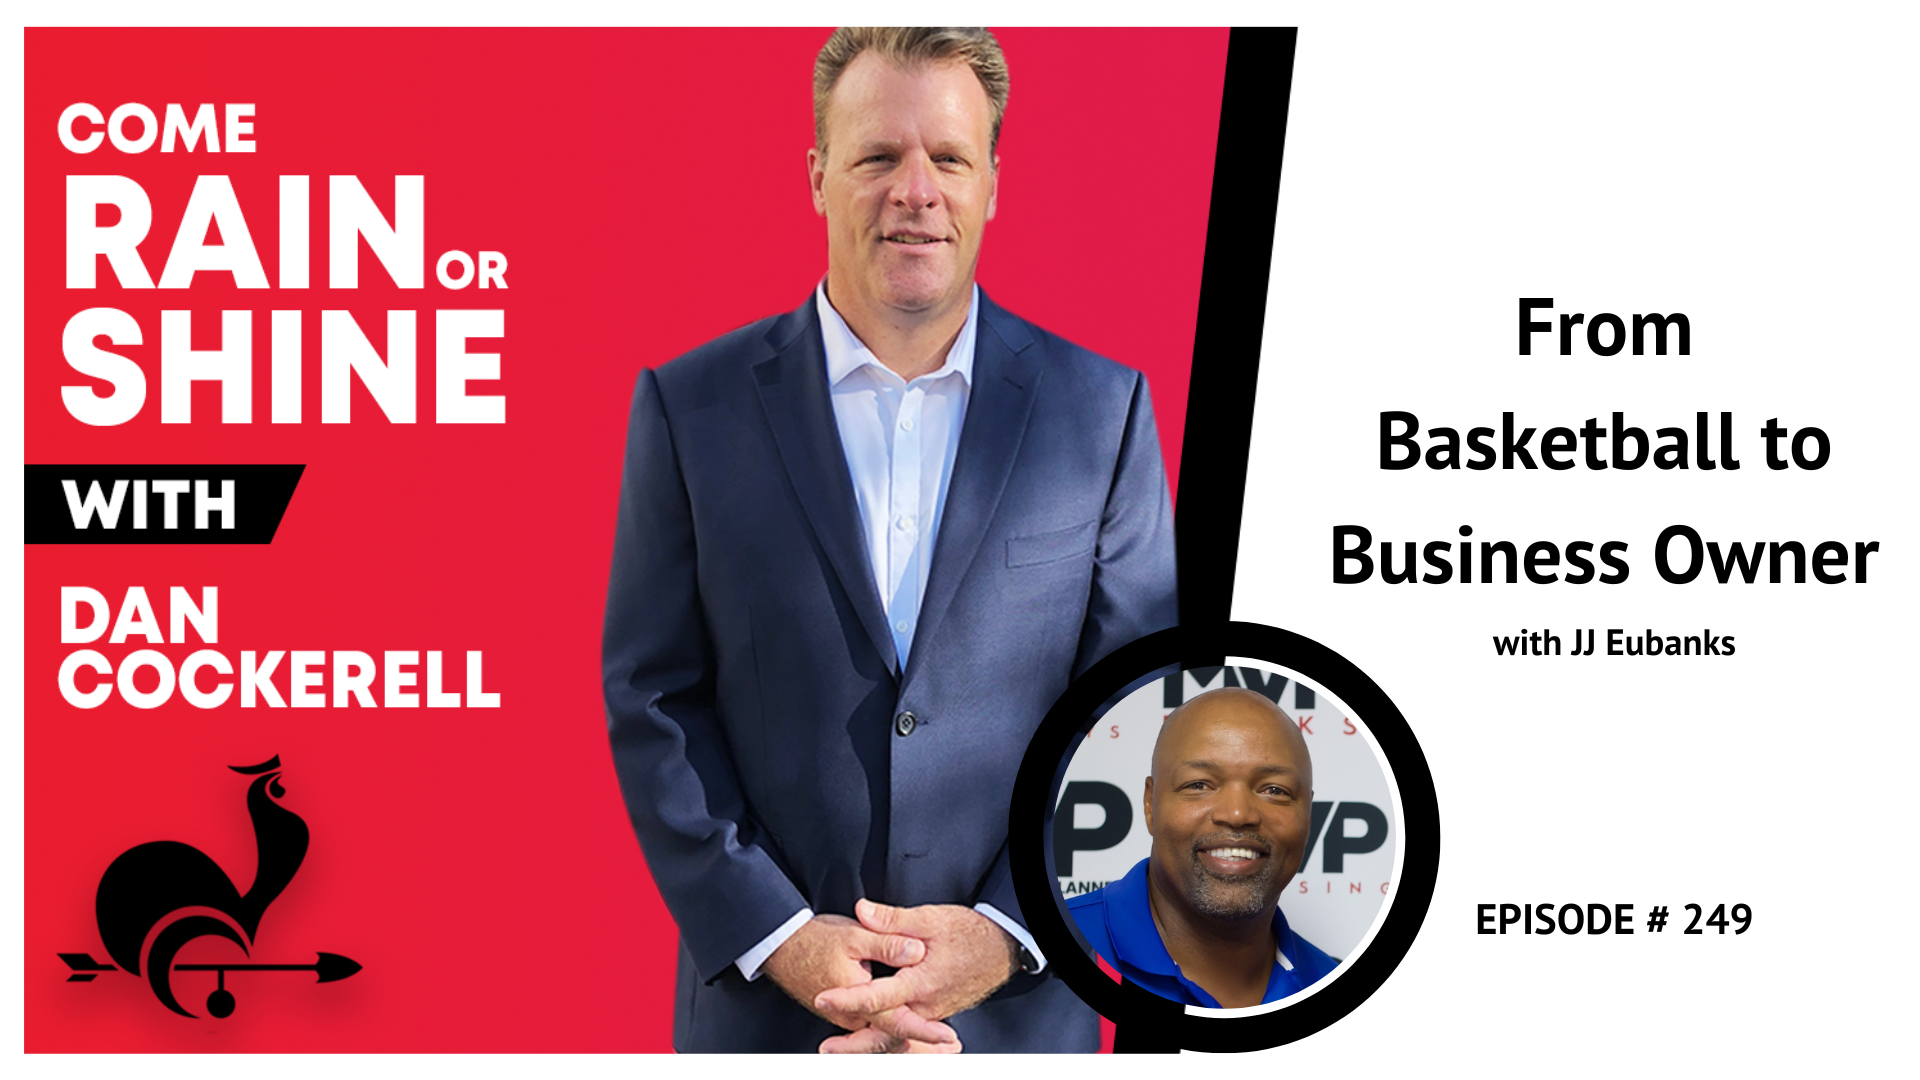 Come Rain or Shine Episode 249 JJ Eubanks From Basketball to Business Owner